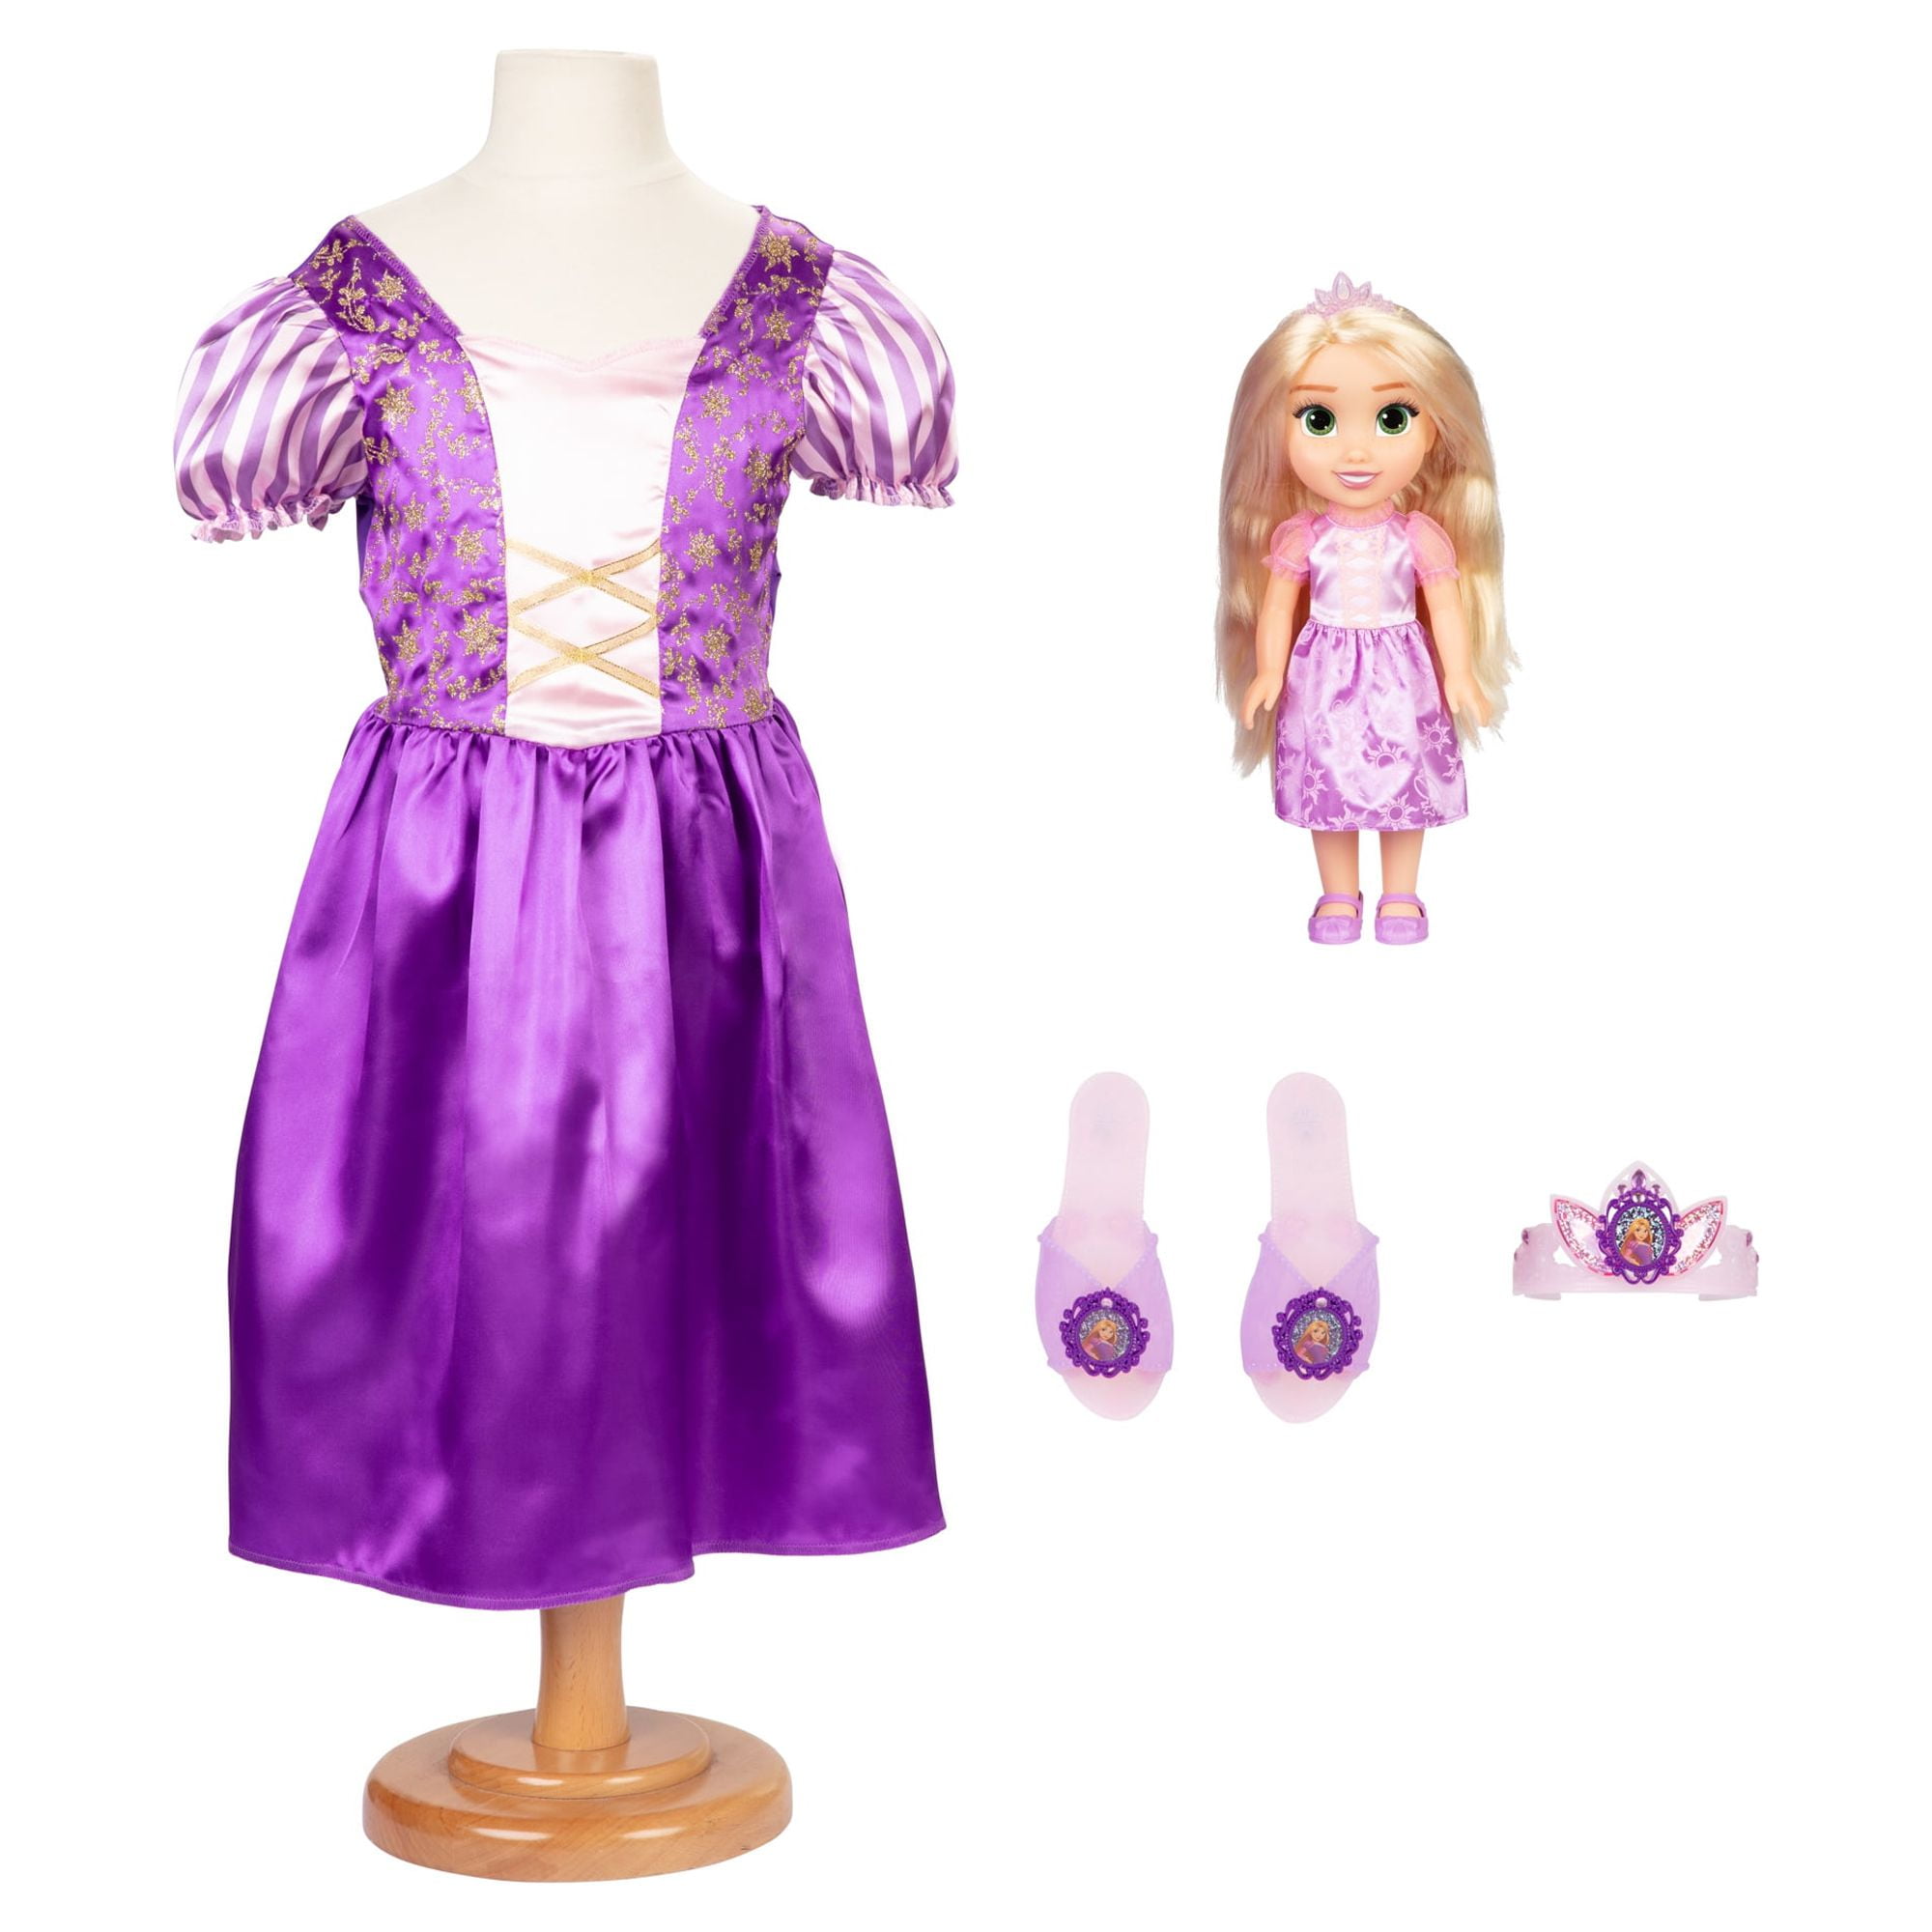 Dolls & Plush  Disney Princess Kids Royal Fashions And Friends, Fashion  Doll 3-Pack, Ariel, Moana, And Rapunzel, Toy For Girls 3 And Up - La toque  noire